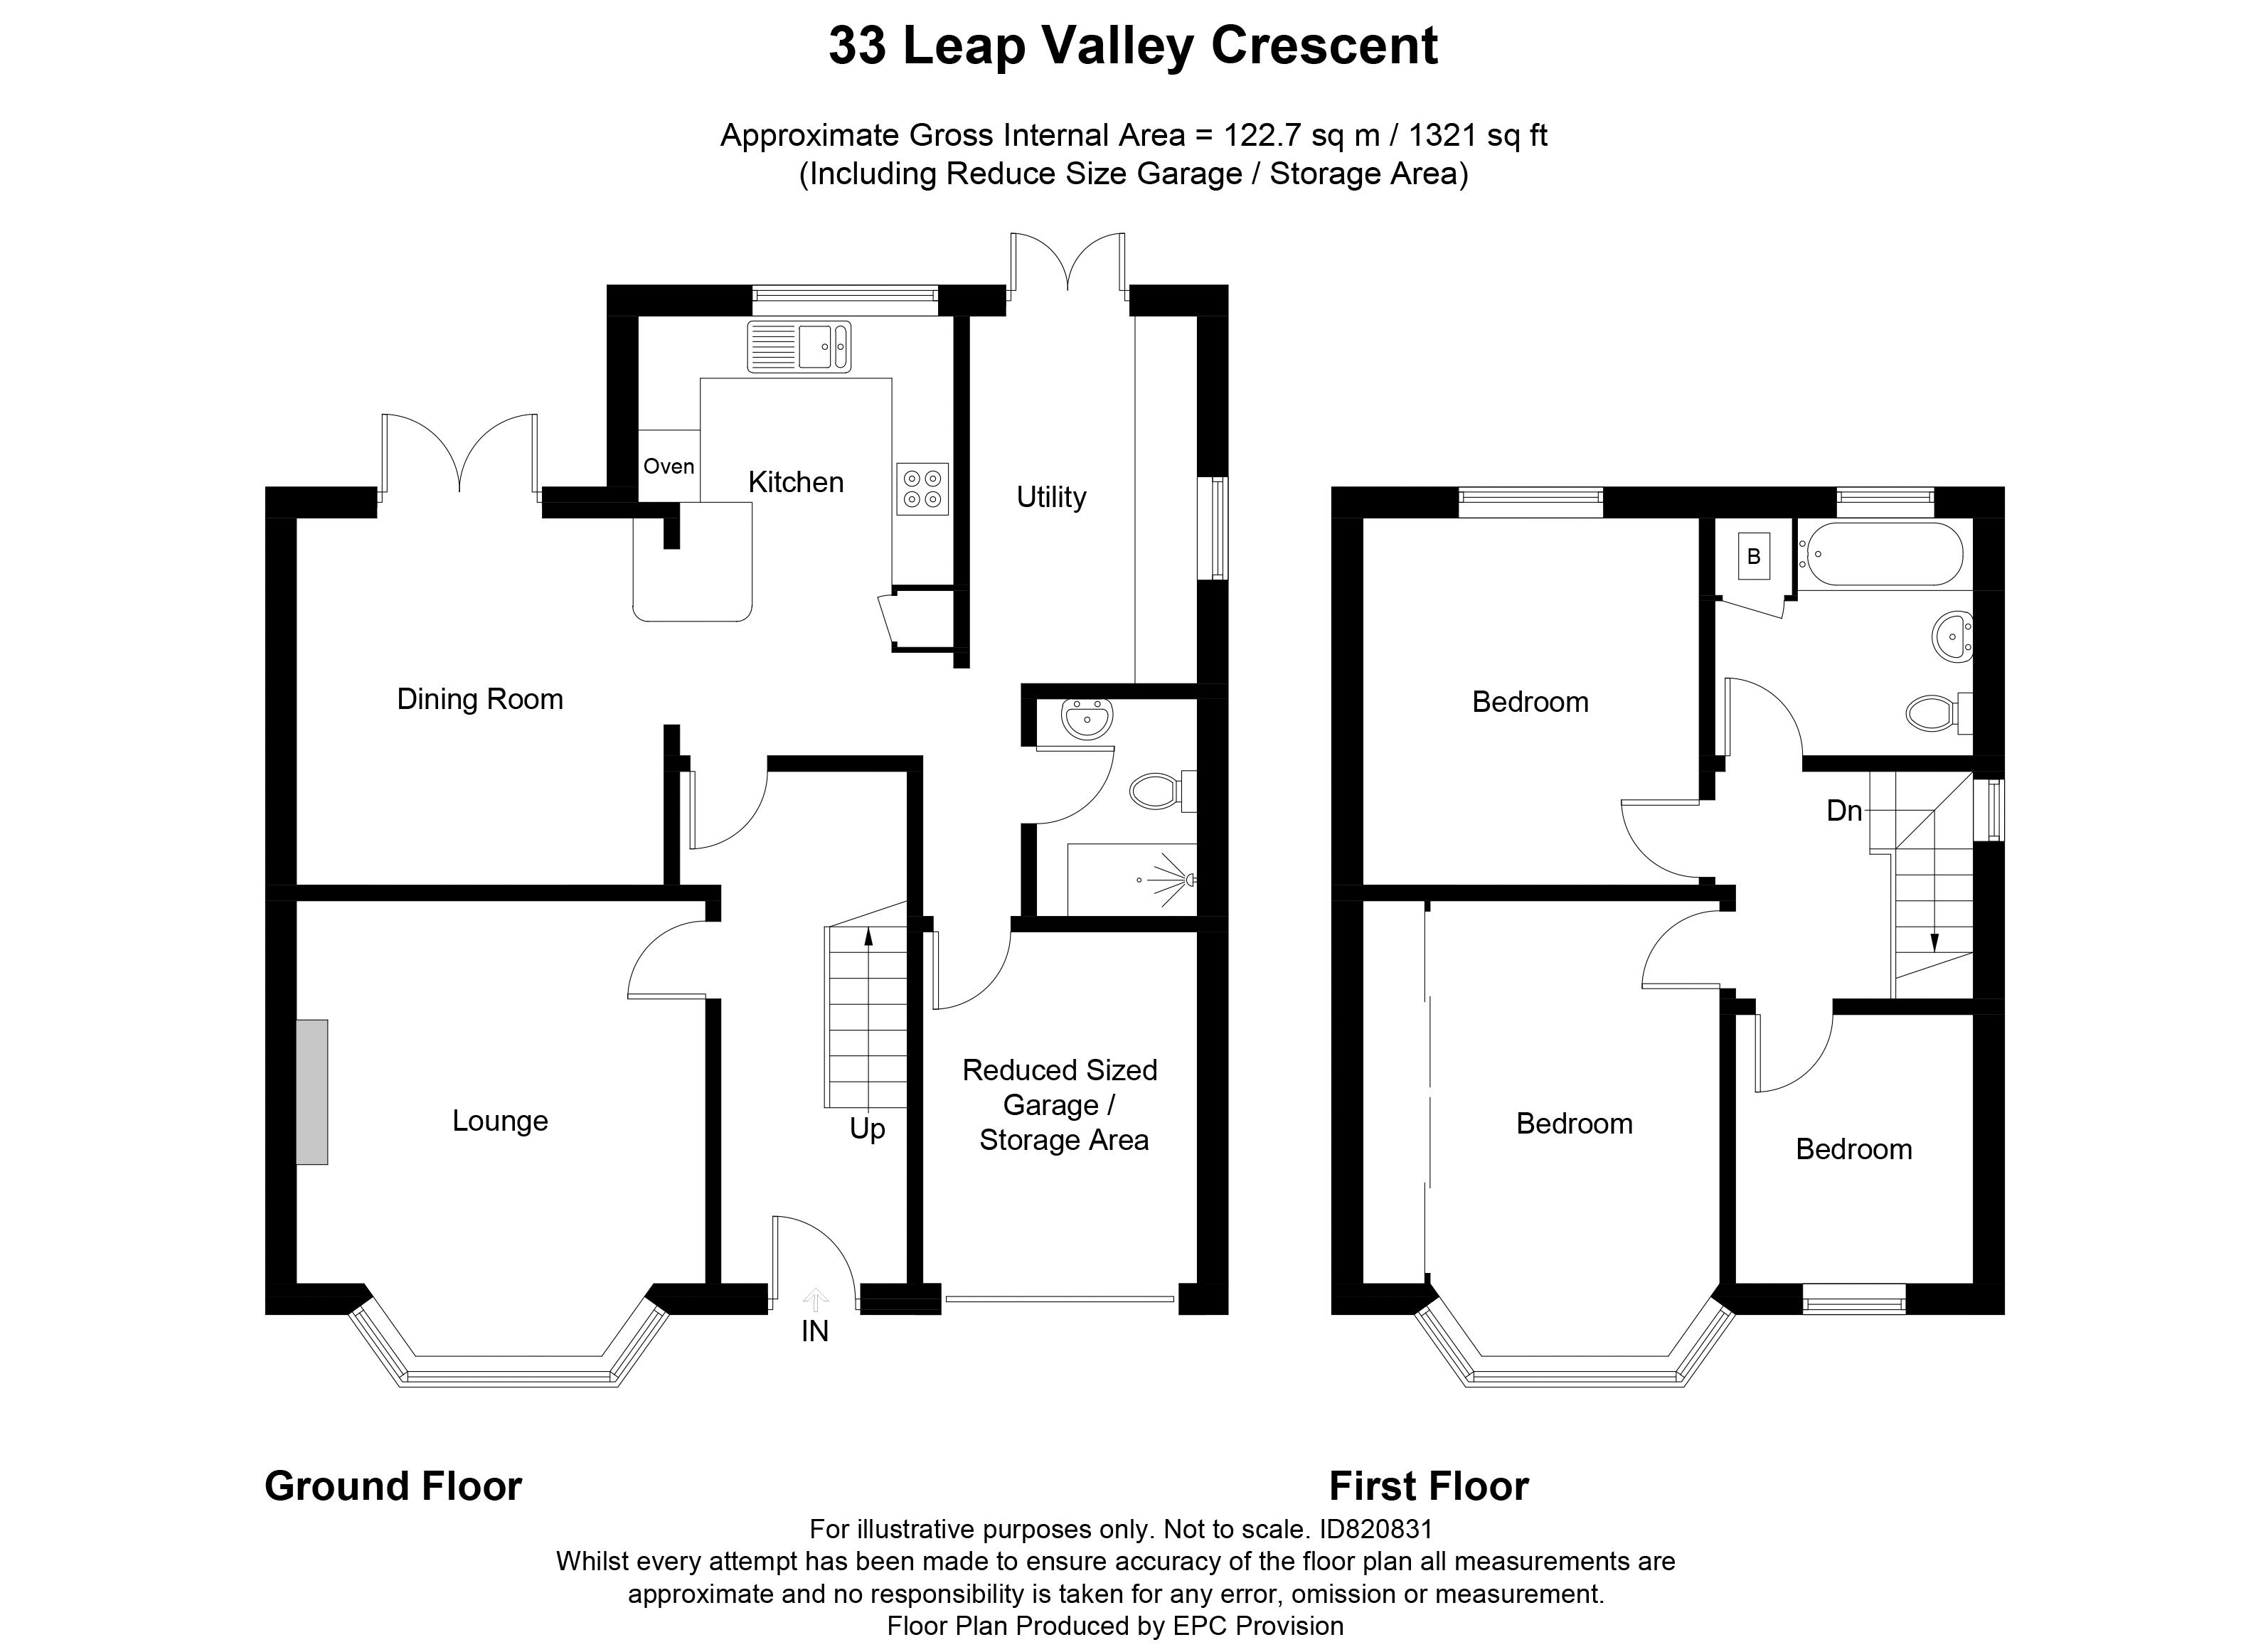 Leap Valley Crescent